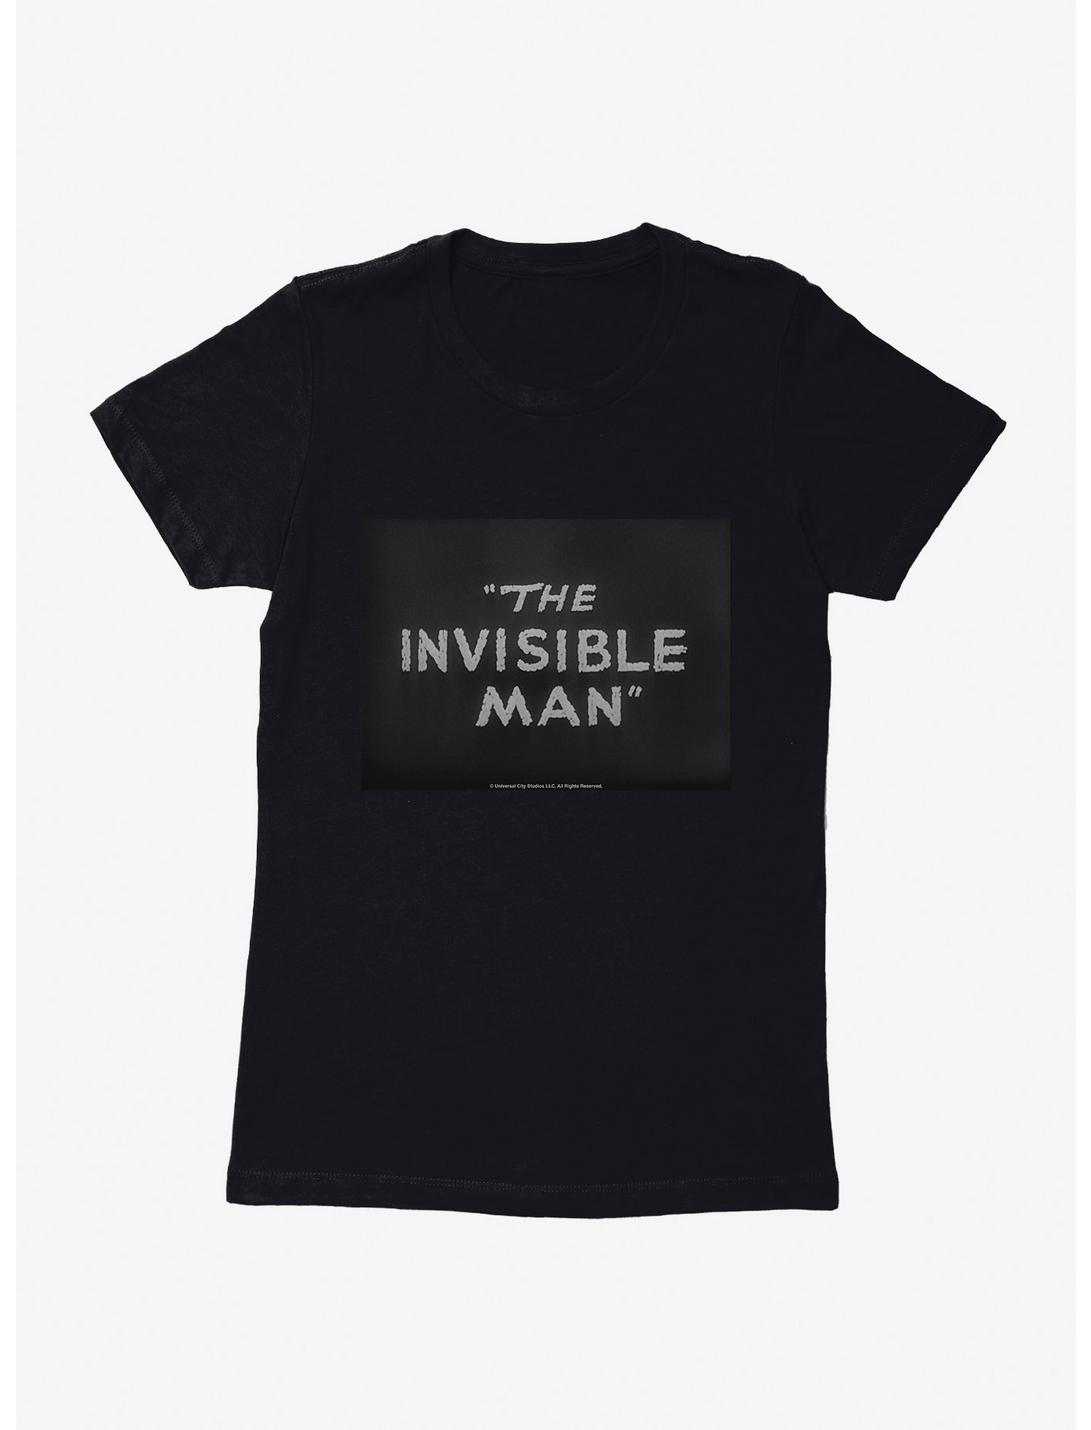 The Invisible Man Title Screen Womens T-Shirt, BLACK, hi-res